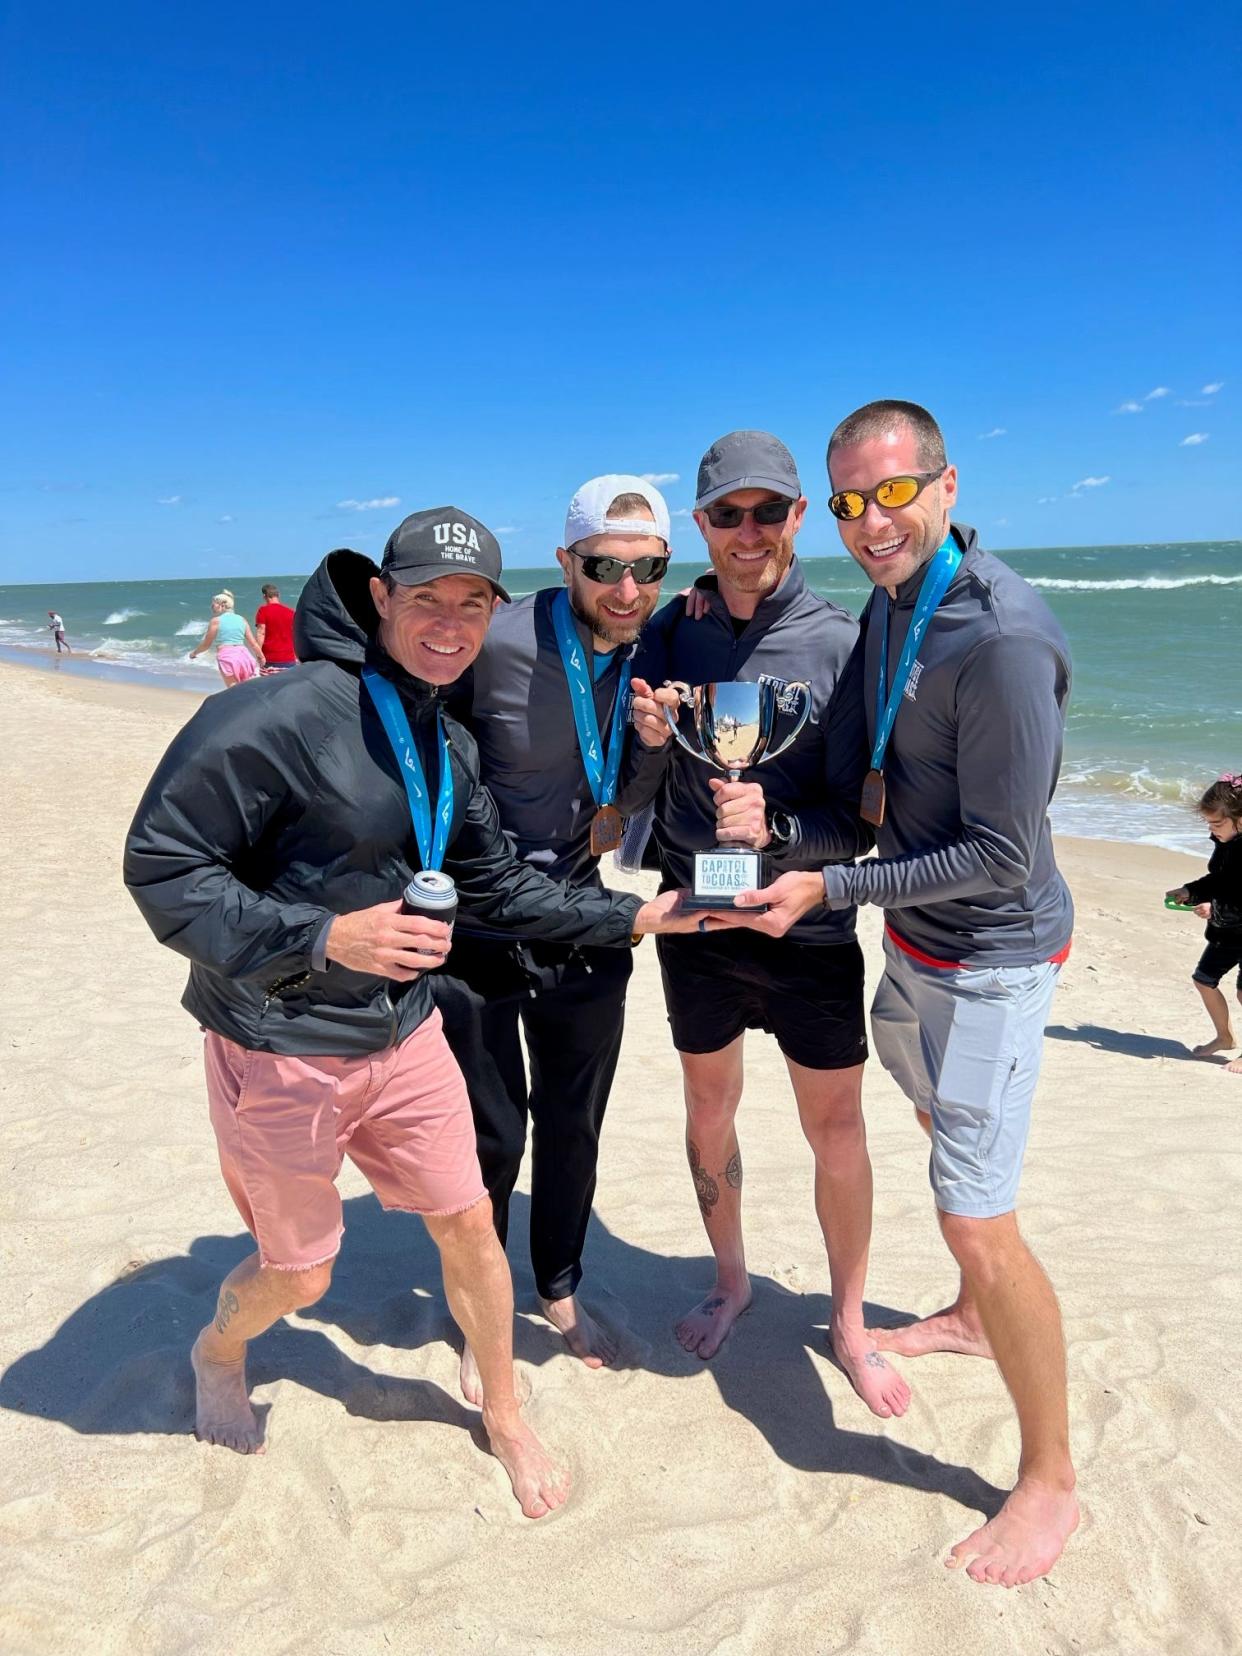 Mickey Moore, Paul Guyas, Darien Angelier and Bob Reifinger (missing Elyse Gallegos and Trevor Foley) from their Capitol to Coast team, Saturday, April 9, 2022, which finished finished 3rd in a time of 9:01:39 teams, good enough for a nice trophy.